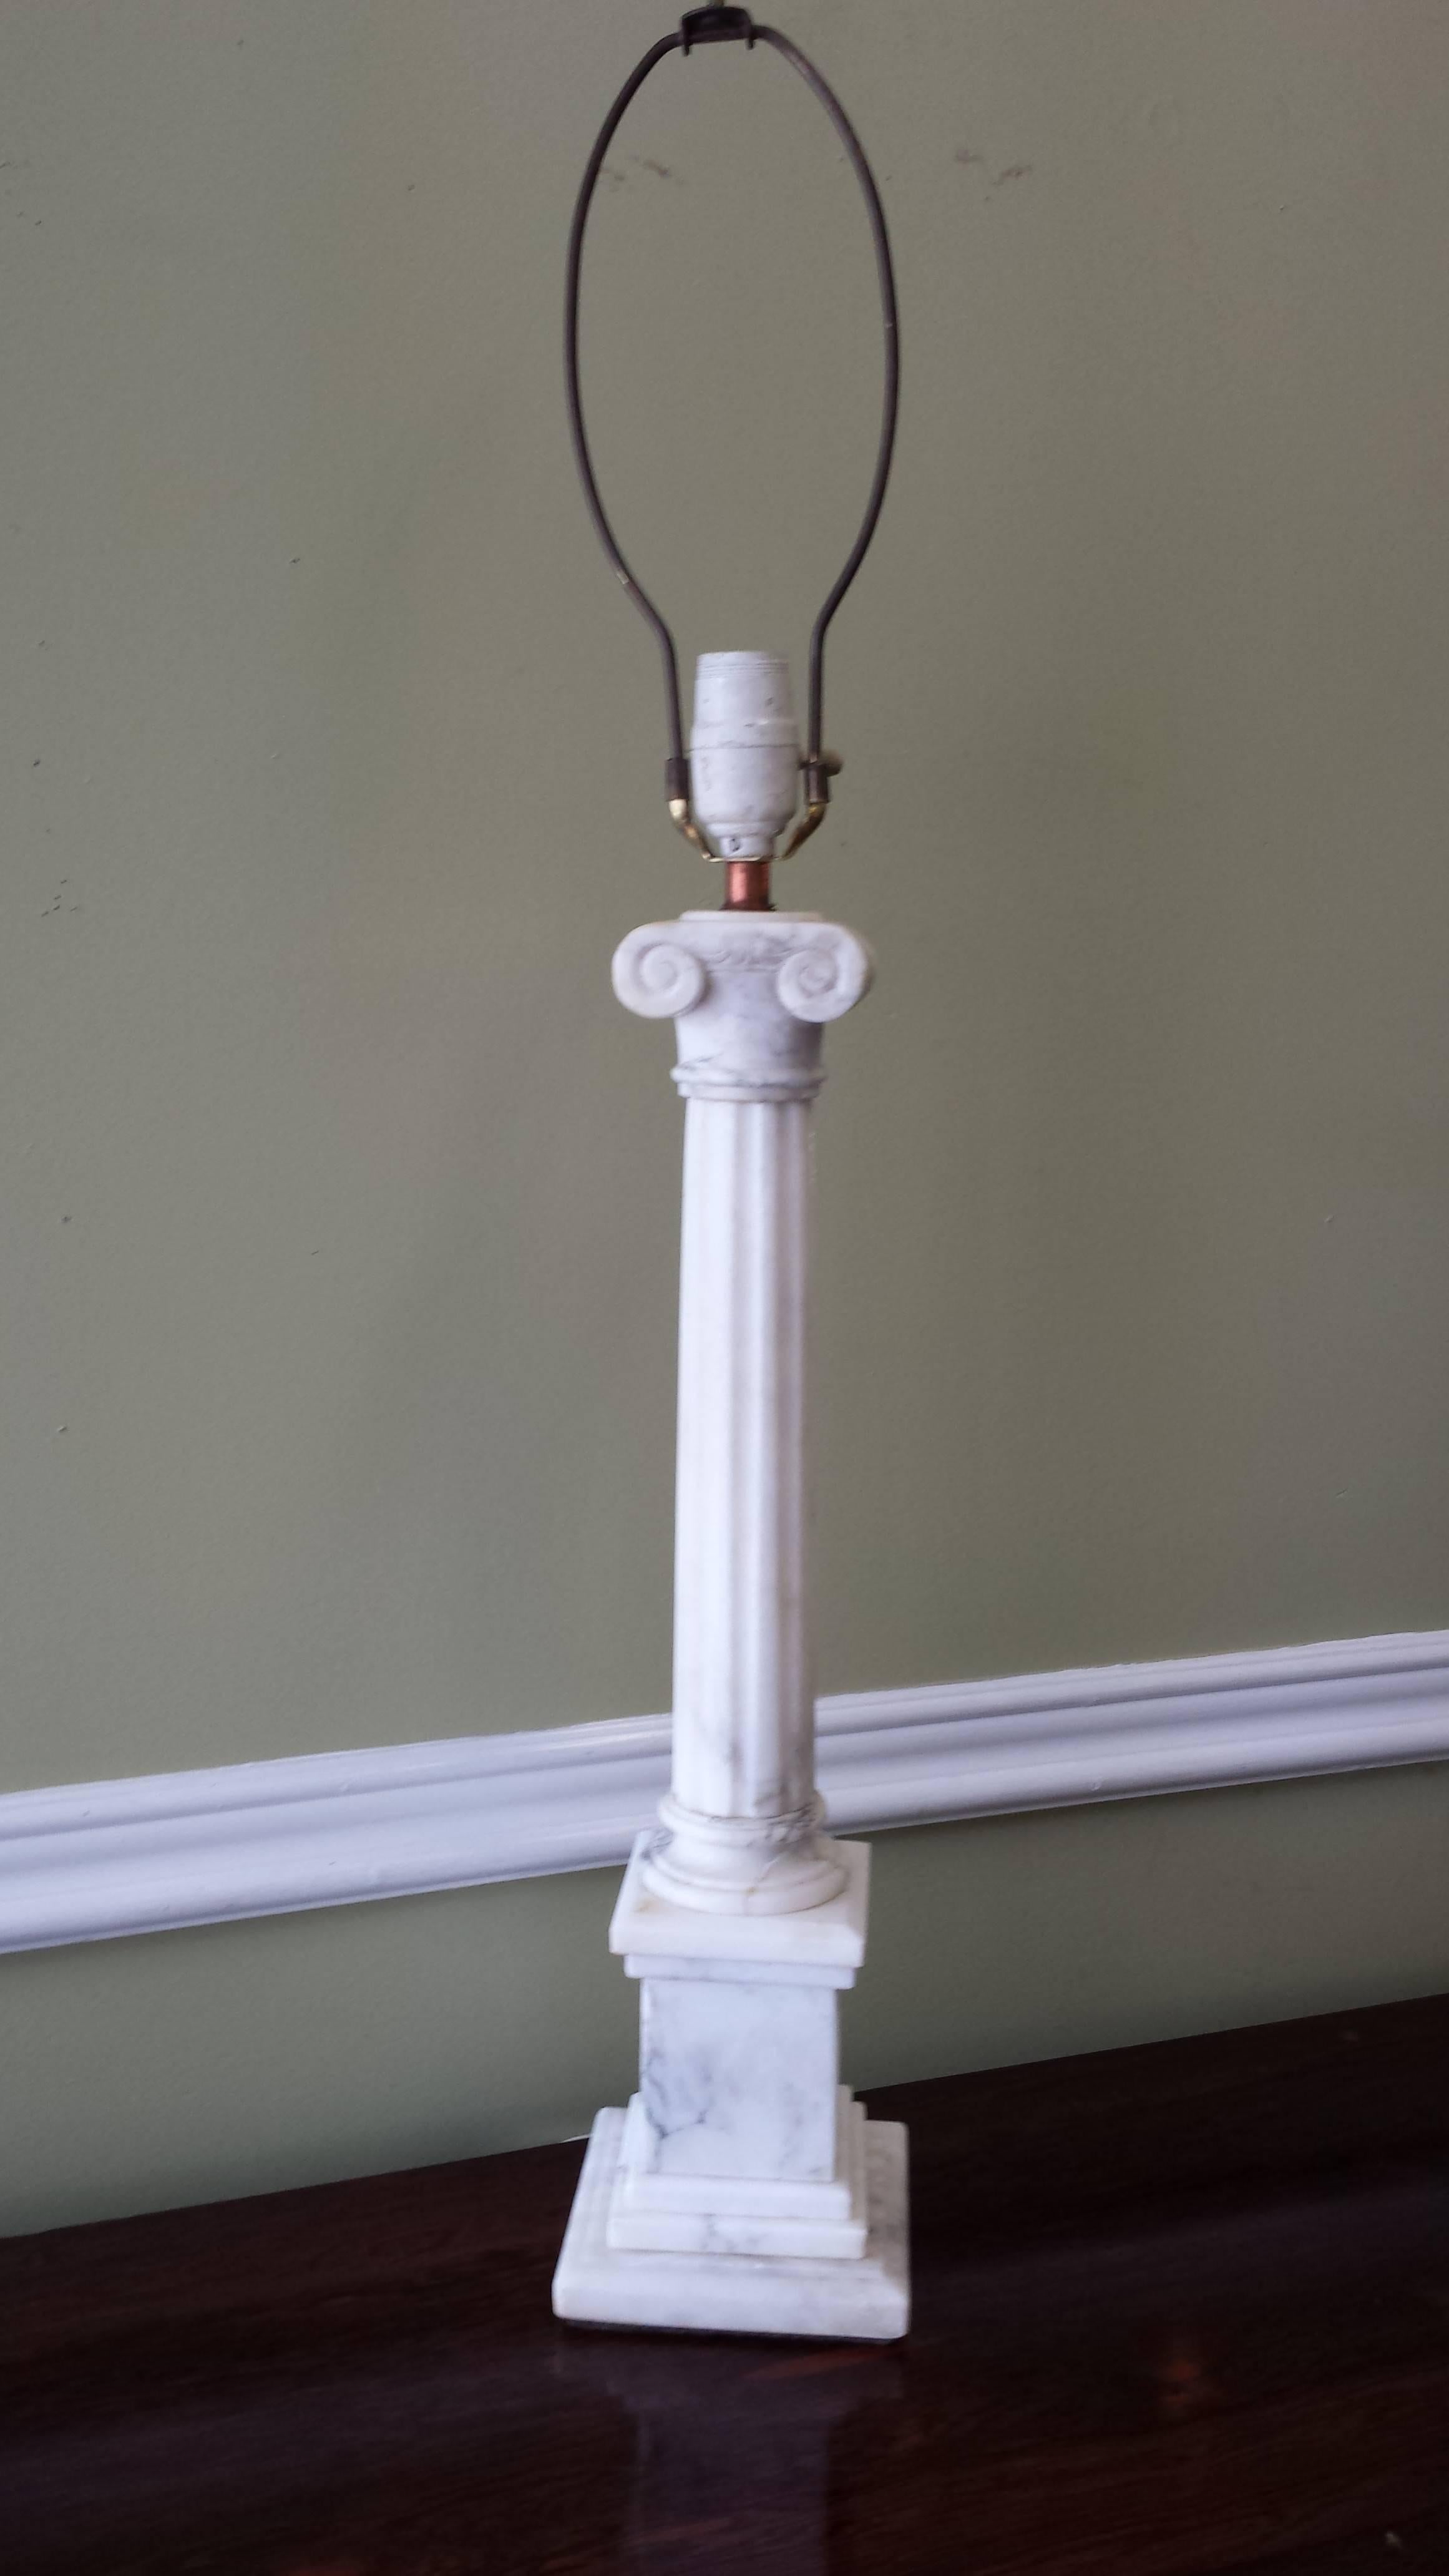 Iconic neoclassical white marble capital column table lamp, circa 1930. Never out of style column lamp measuring 20" inches high x 5" inches x 5" inch square base. The fluted column and scrolled plinth top is nicely detailed as per